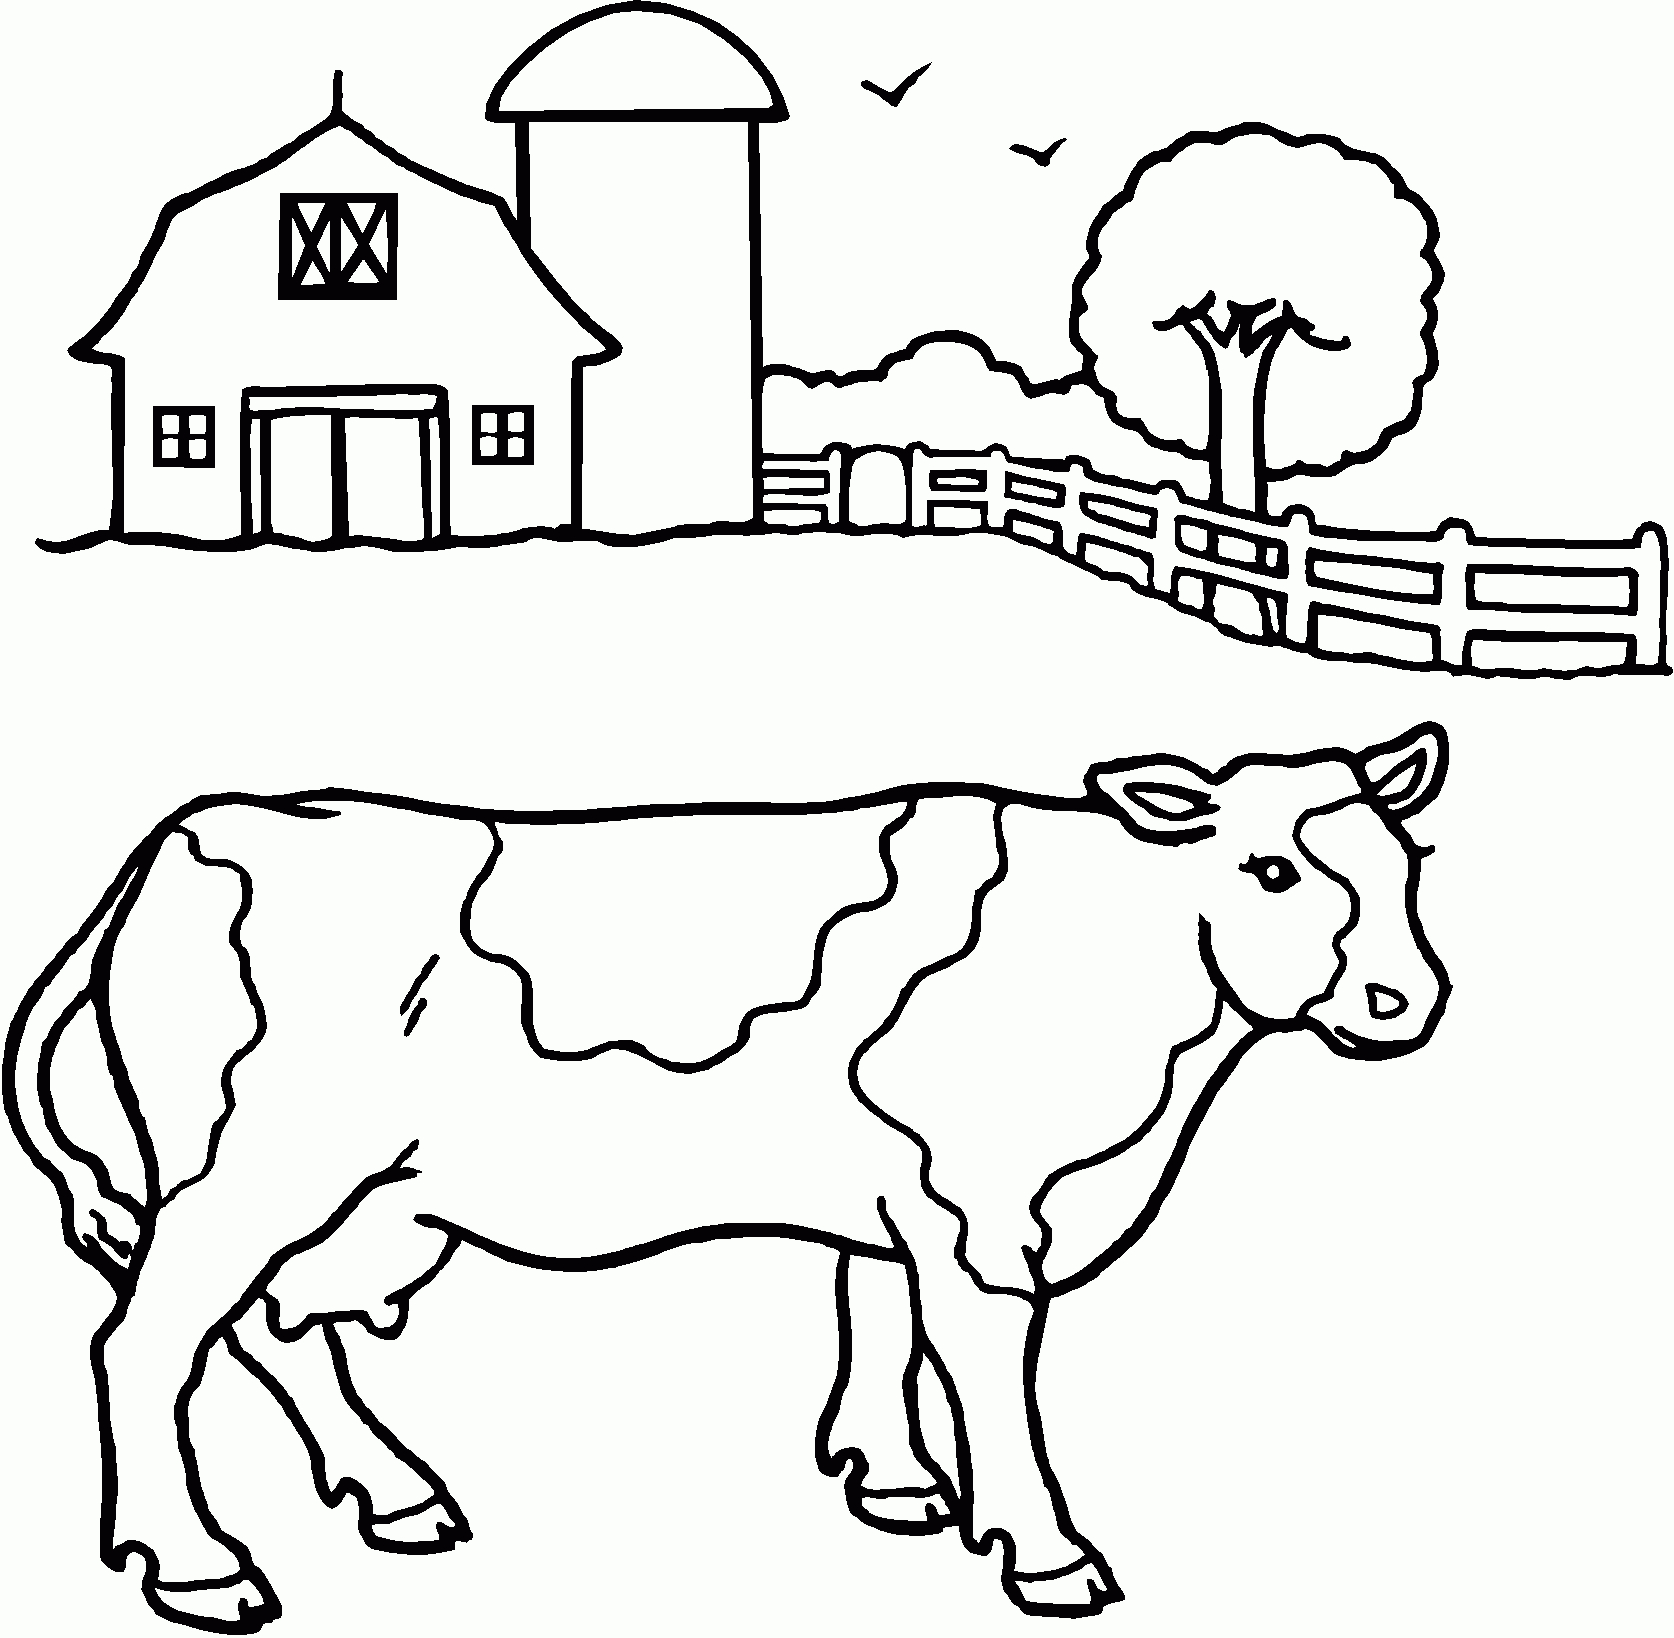 Free Printable Cow Coloring Sheets | Coloring - Coloring Home - Coloring Pages Of Cows Free Printable